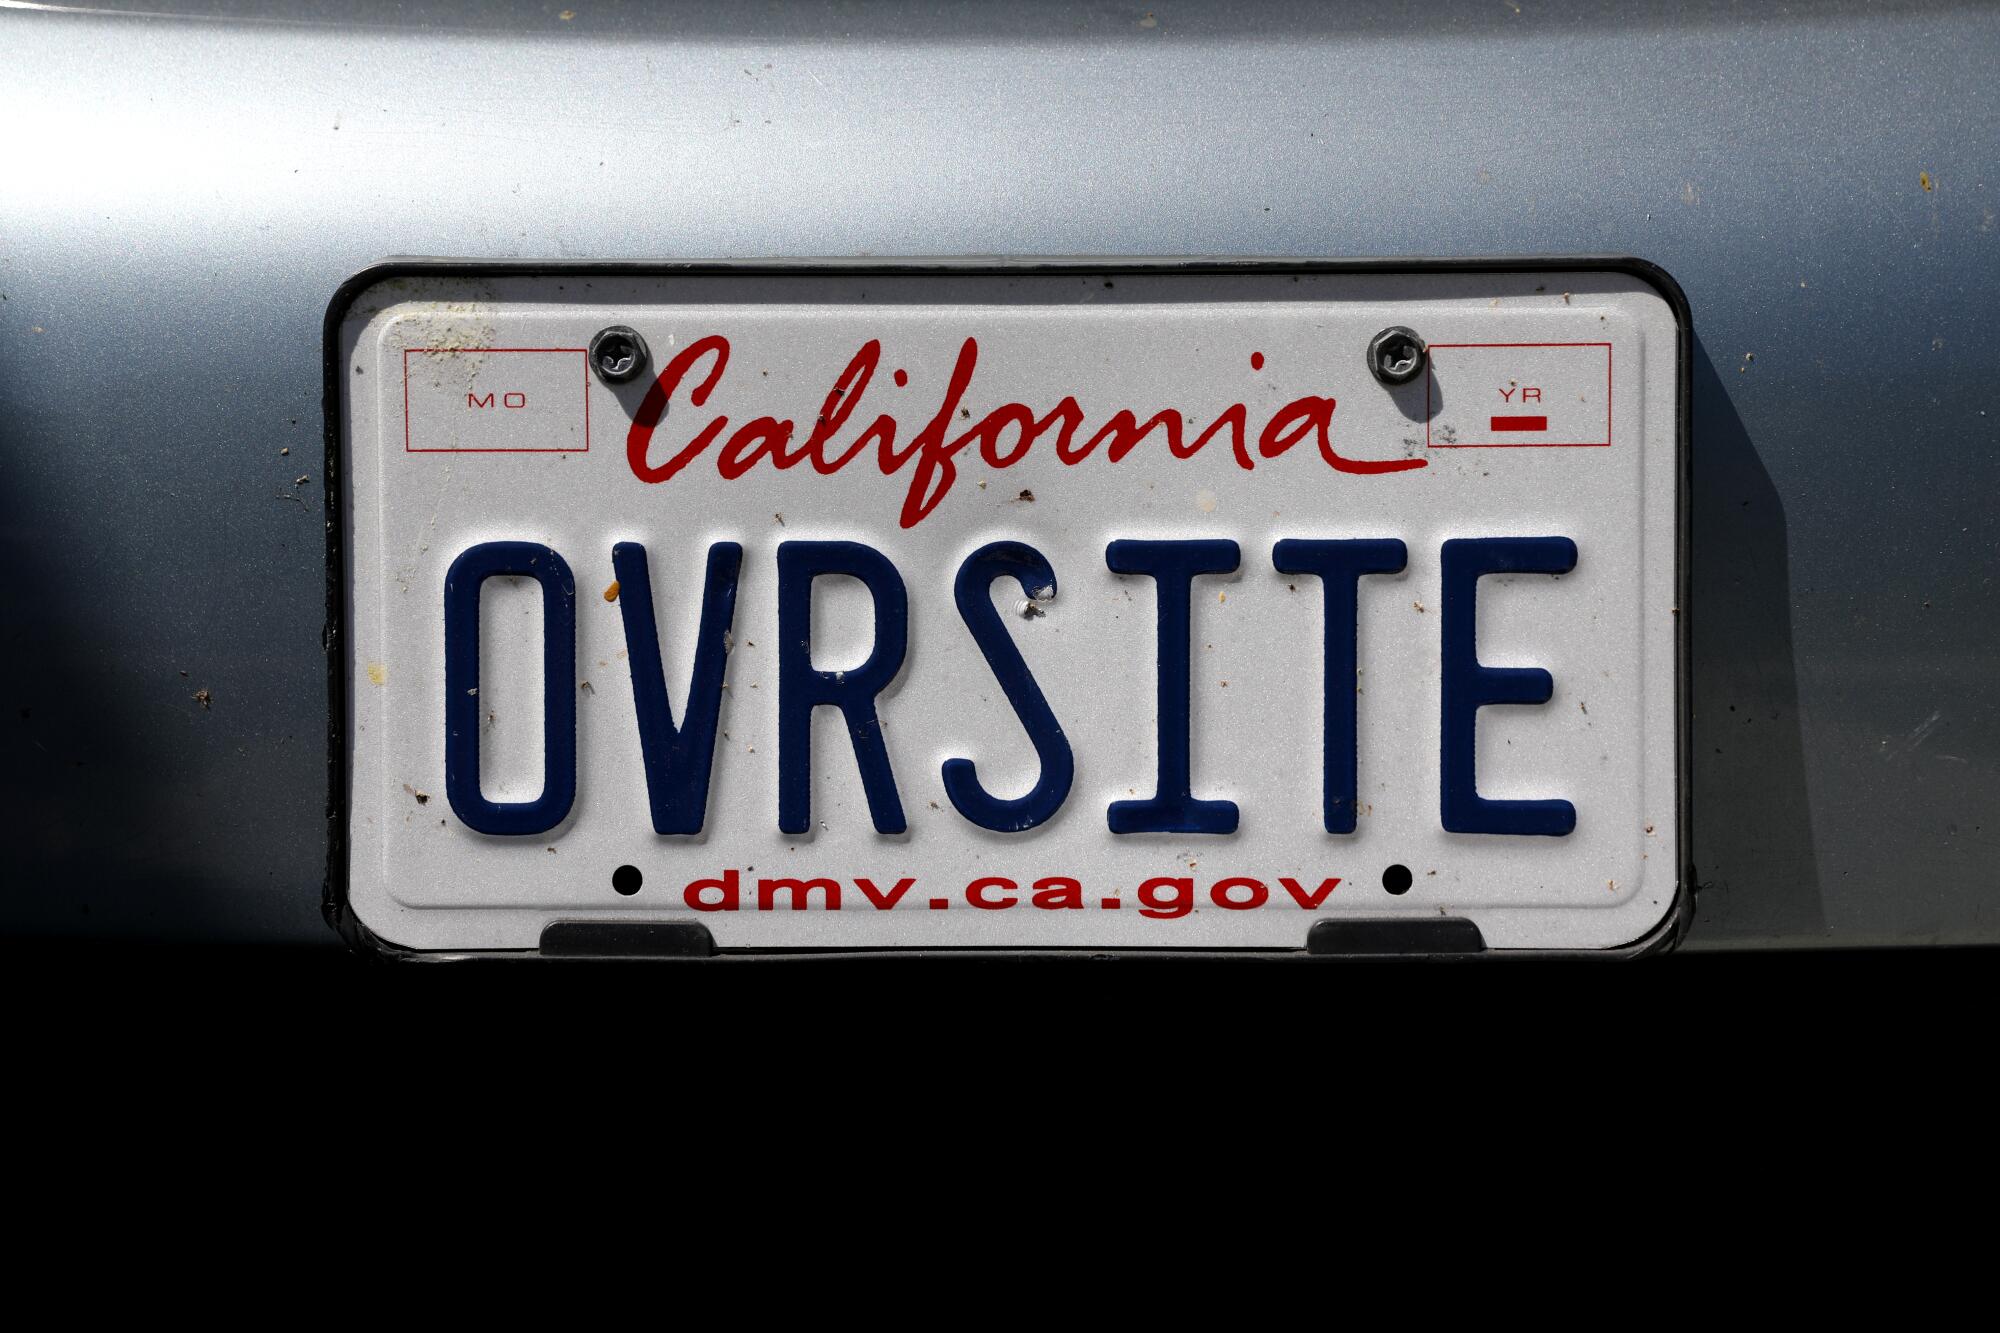 A California license plate reading "OVRSITE" on a dark vehicle